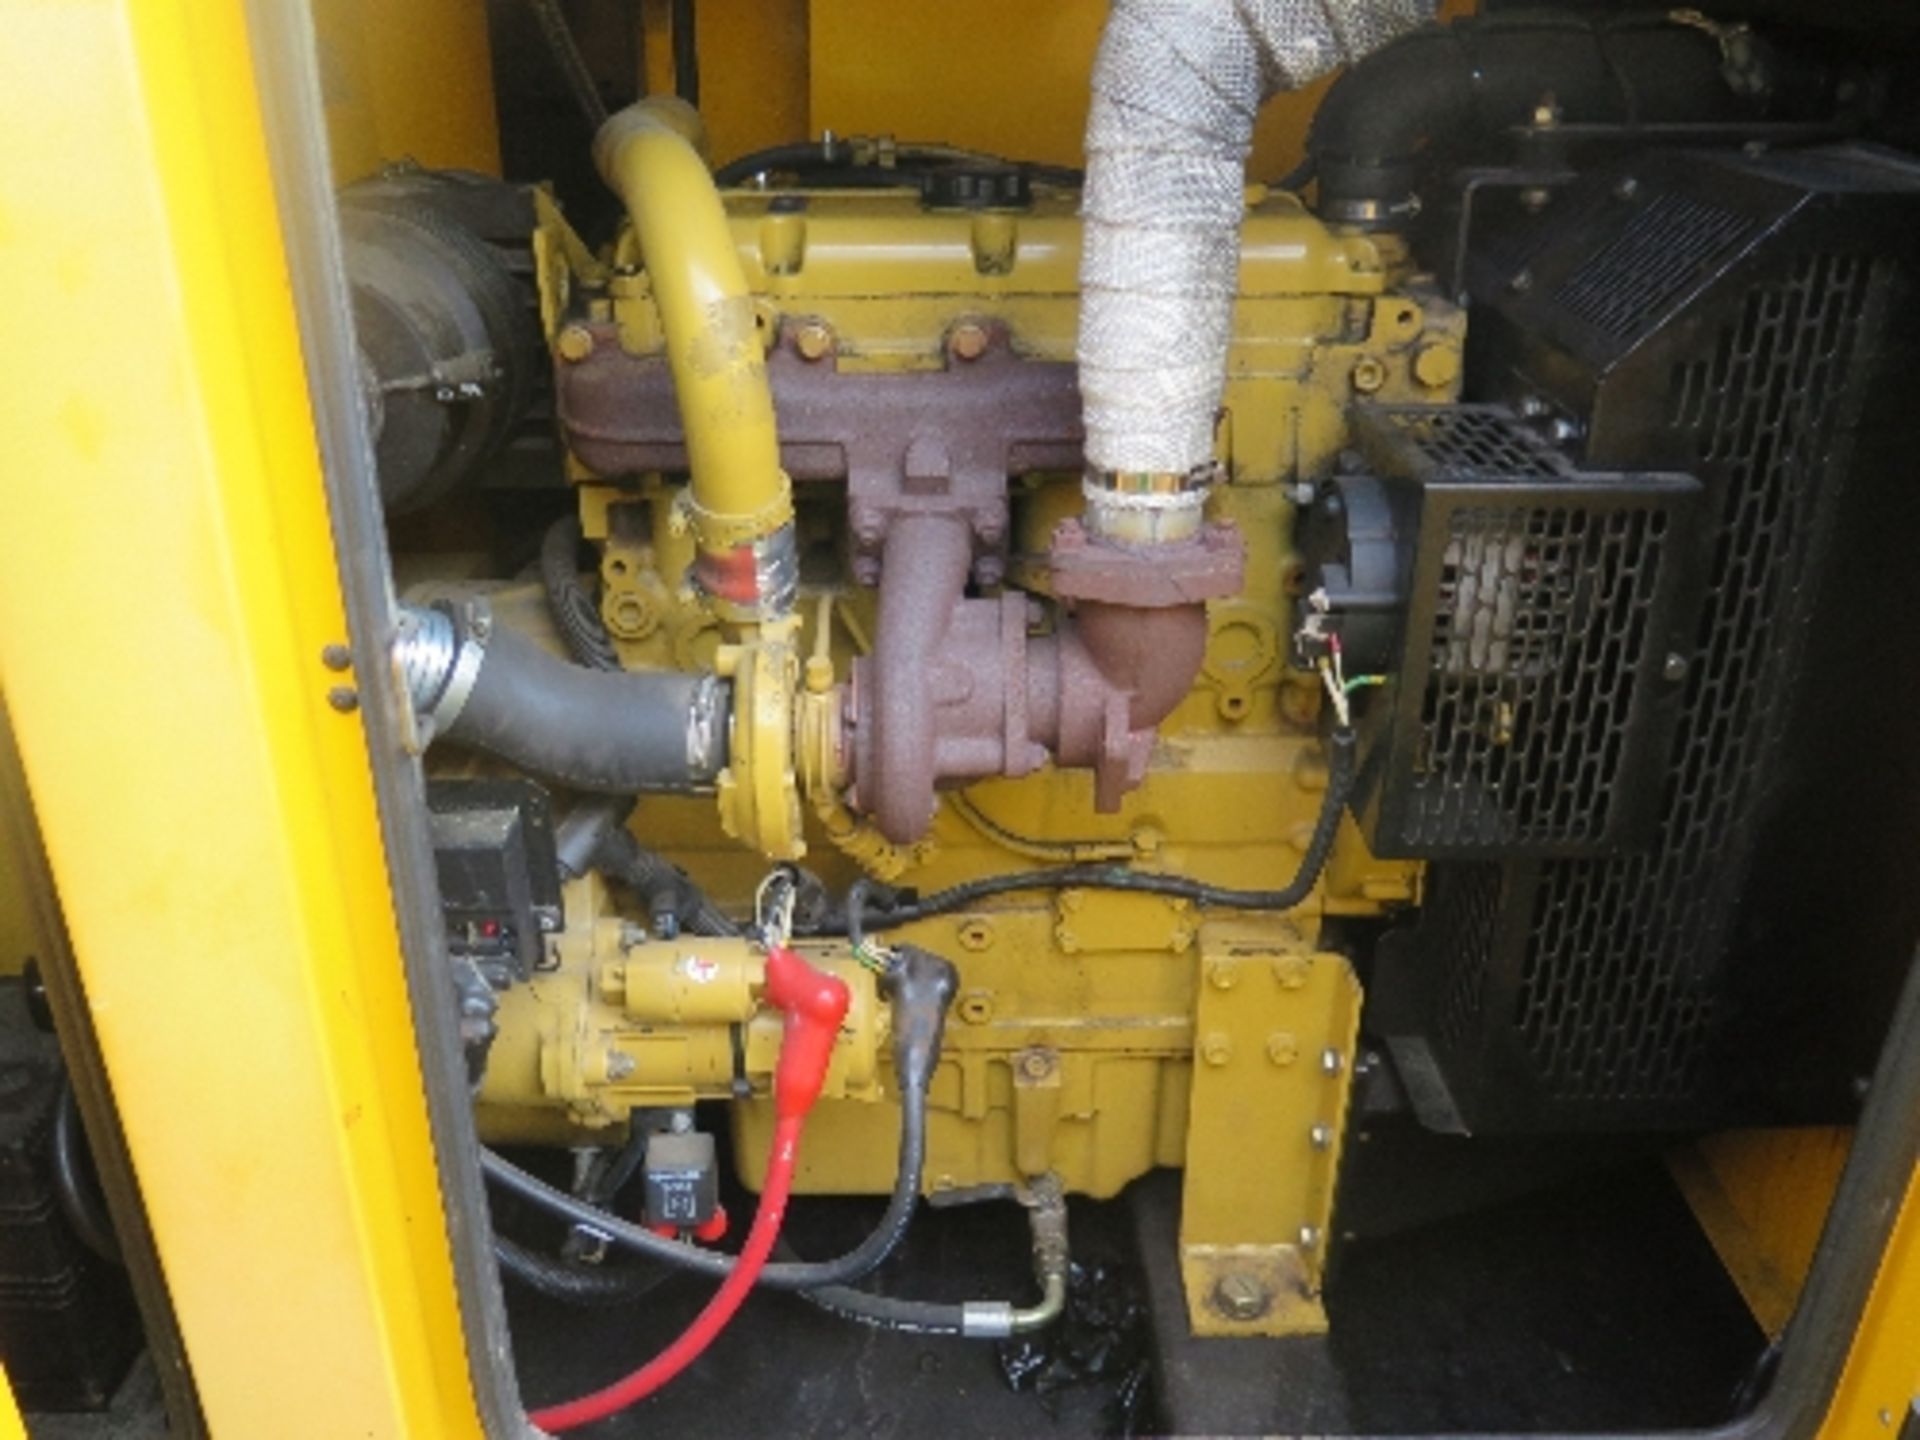 Caterpillar XQE80 generator 11729 hrs 157805
PERKINS - RUNS AND MAKES POWER
ALL LOTS are SOLD AS - Image 5 of 6